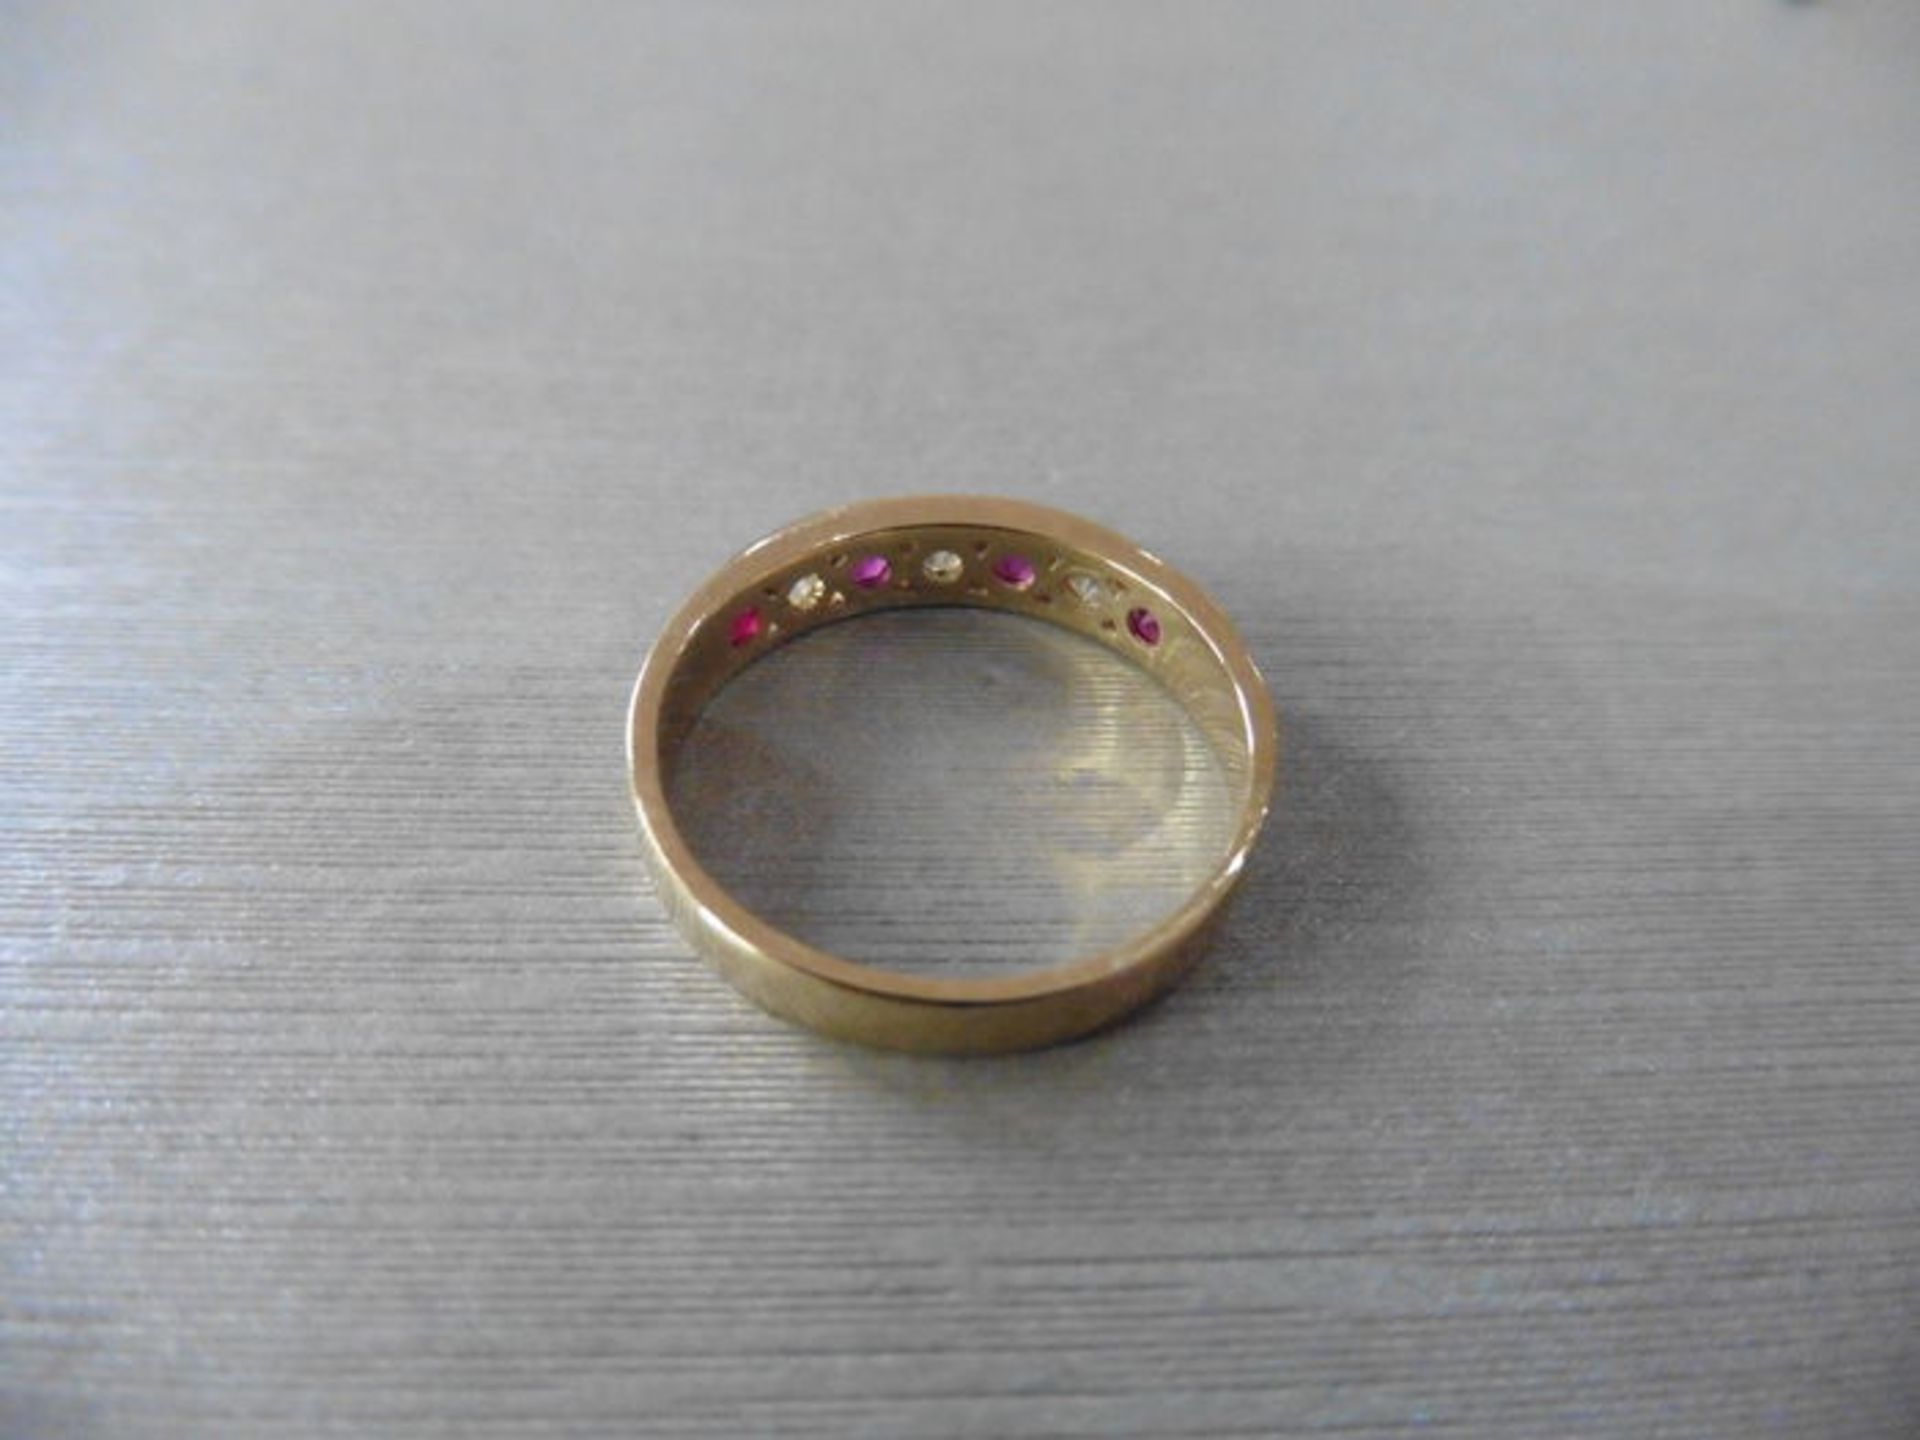 Ruby and diamond eternity band ring set in 9ct yellow gold. 4 small round cut rubies ( treated ) 0. - Image 3 of 3